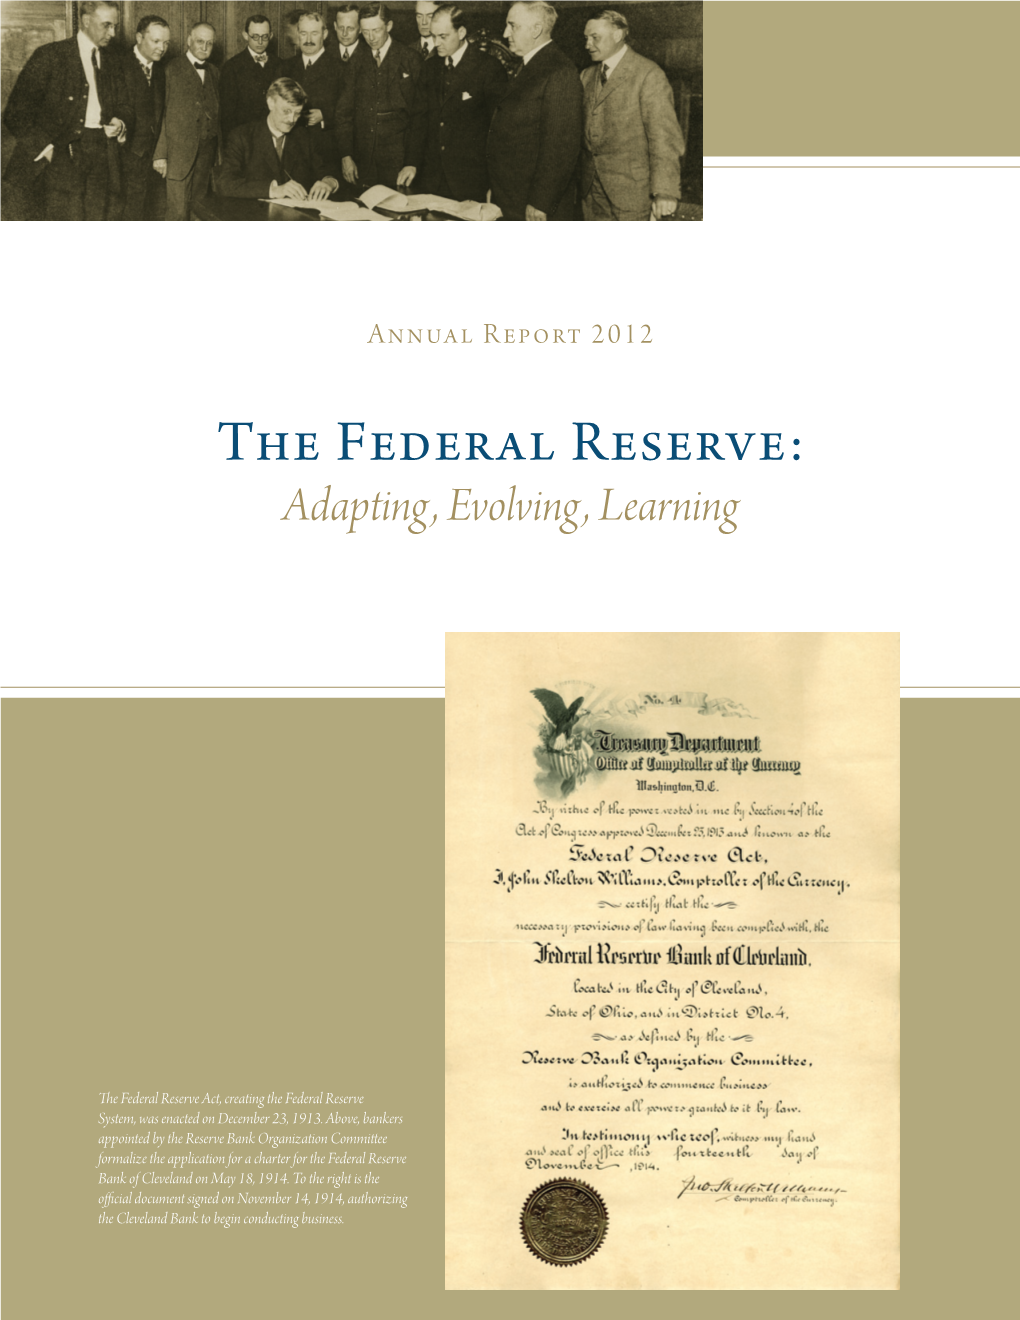 The Federal Reserve: Adapting, Evolving, Learning